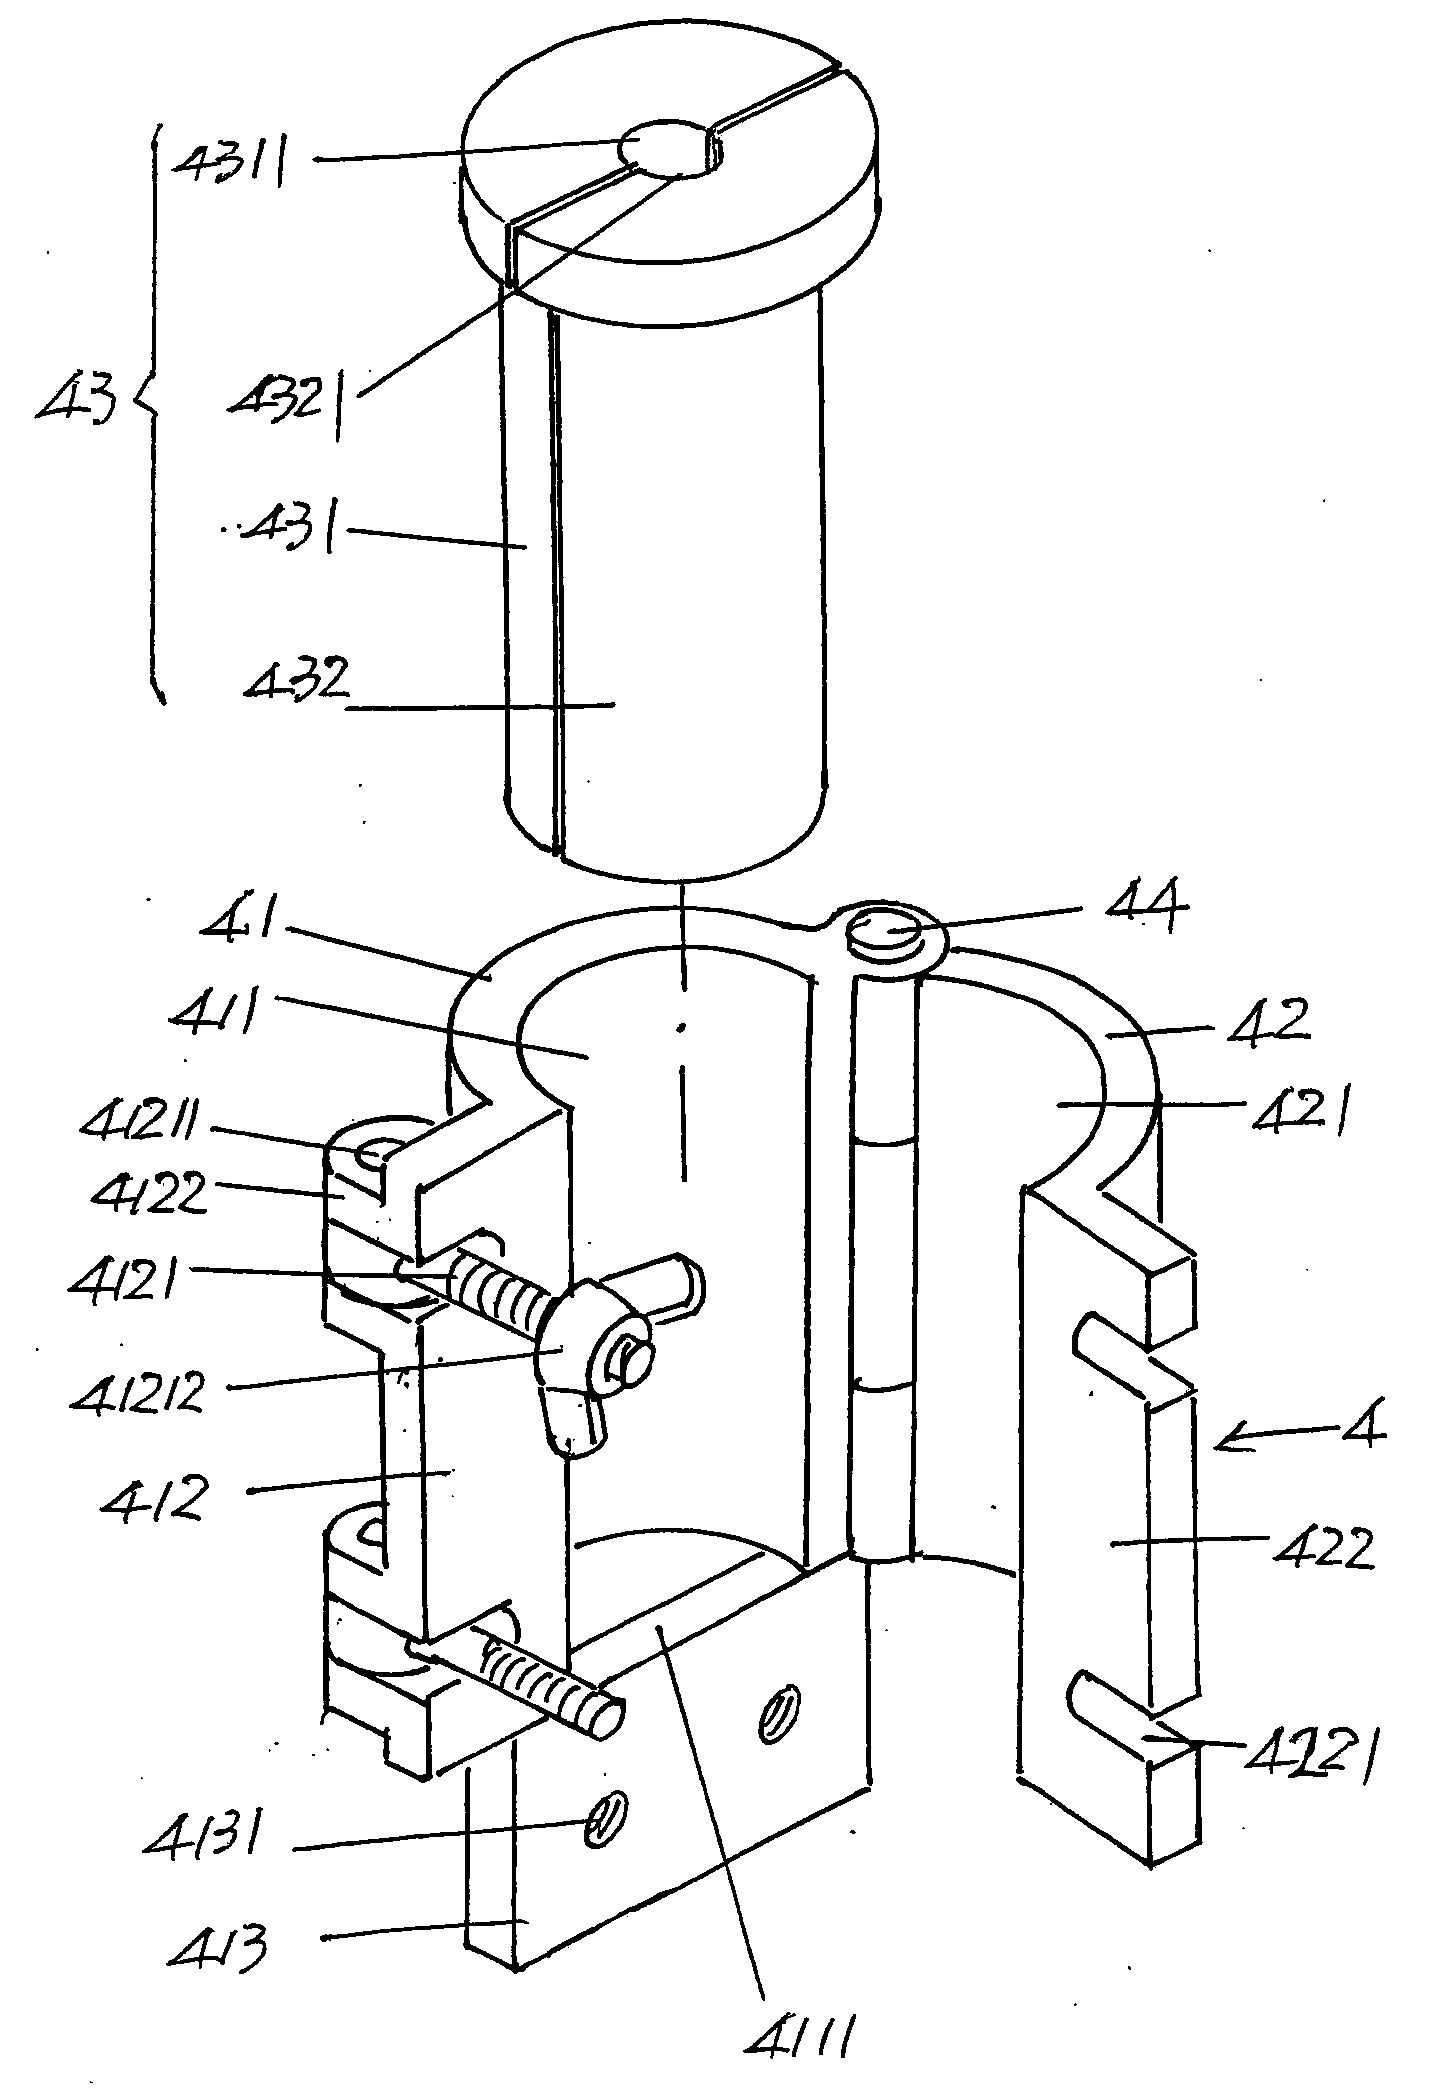 Optical cable testing device